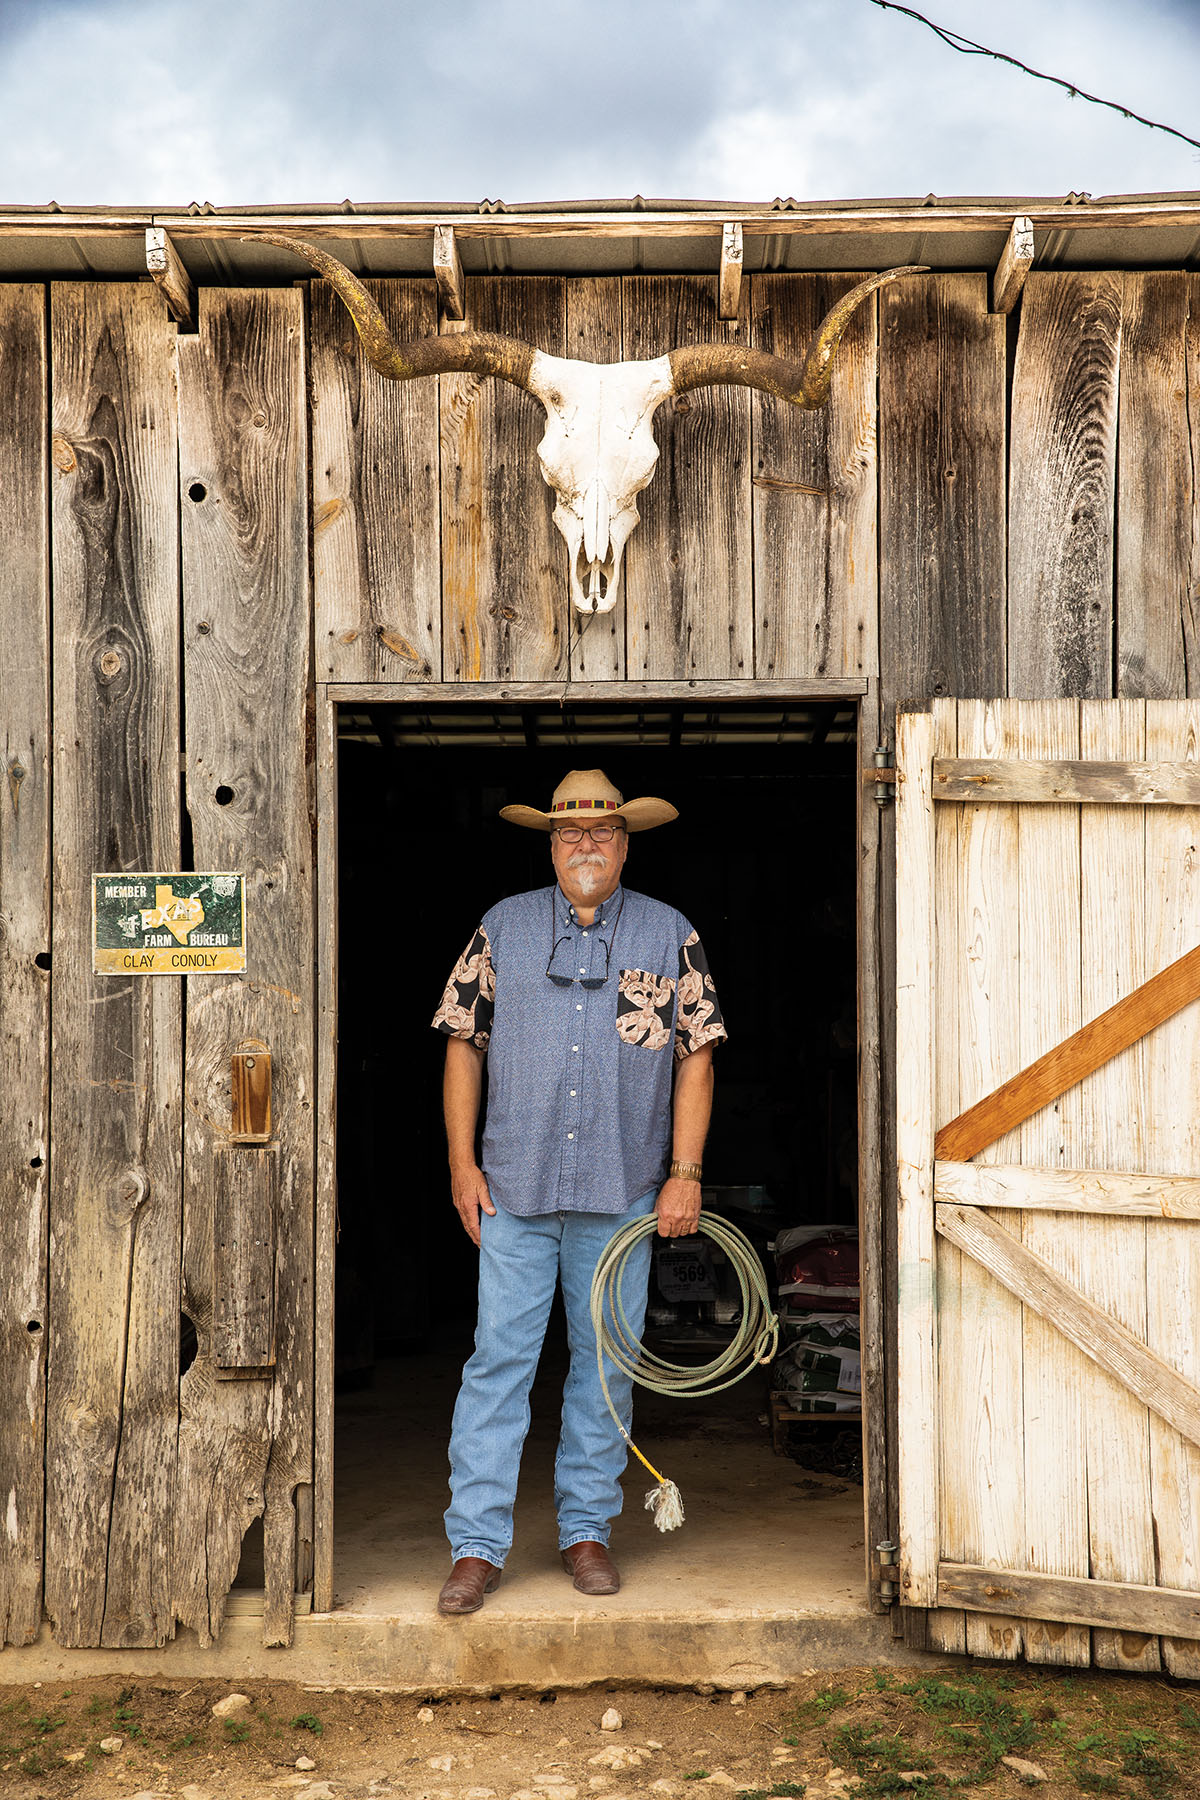 A man in a Western shirt and hat stands in the doorway of a wooden structure holding a rope